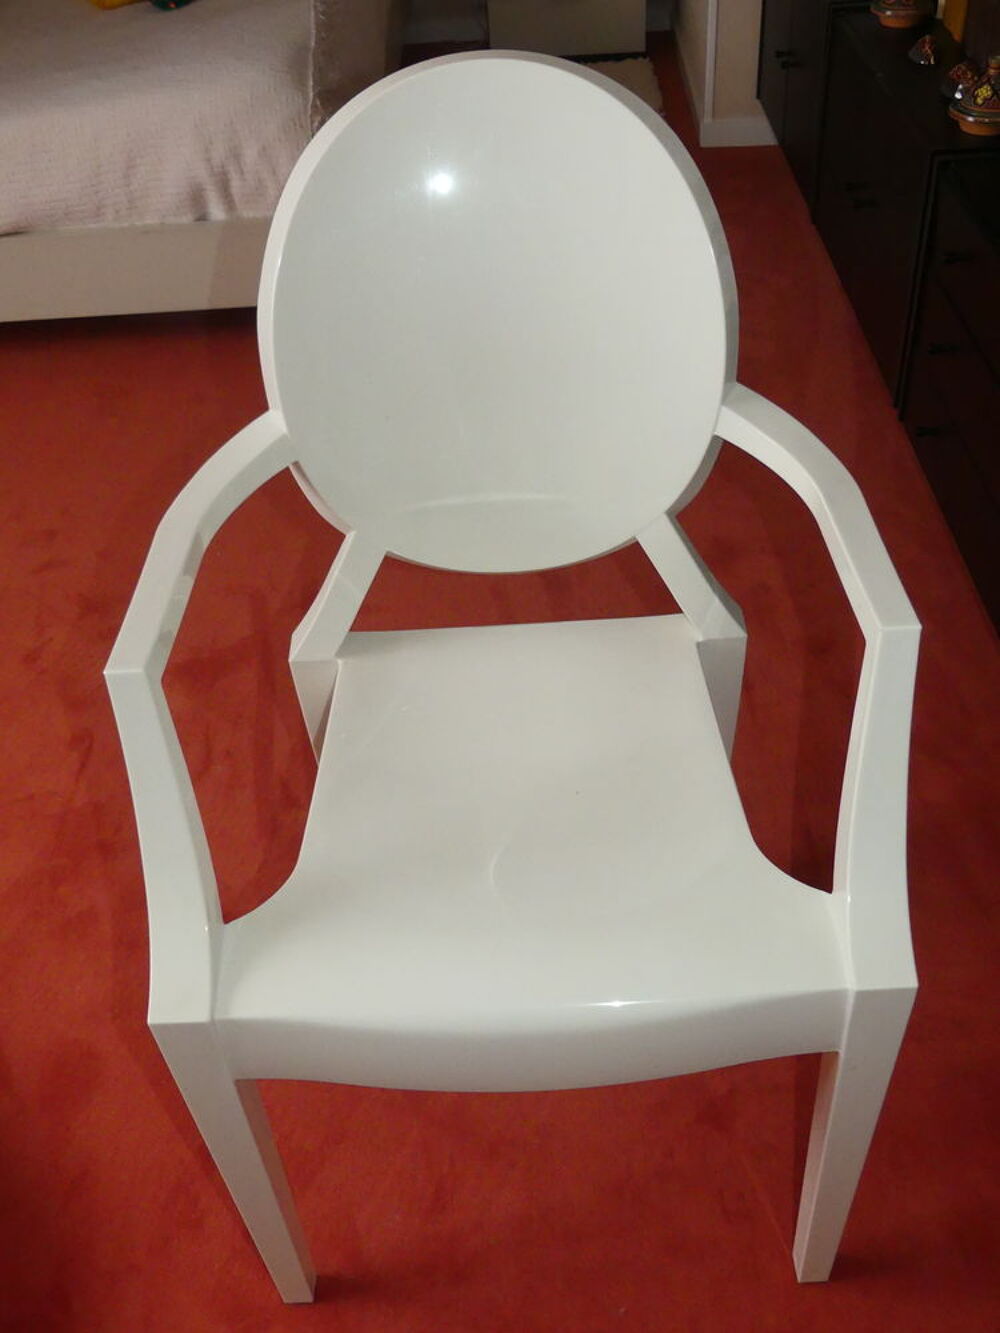 FAUTEUIL LOUIS STYLE GHOST BLANC
Meubles